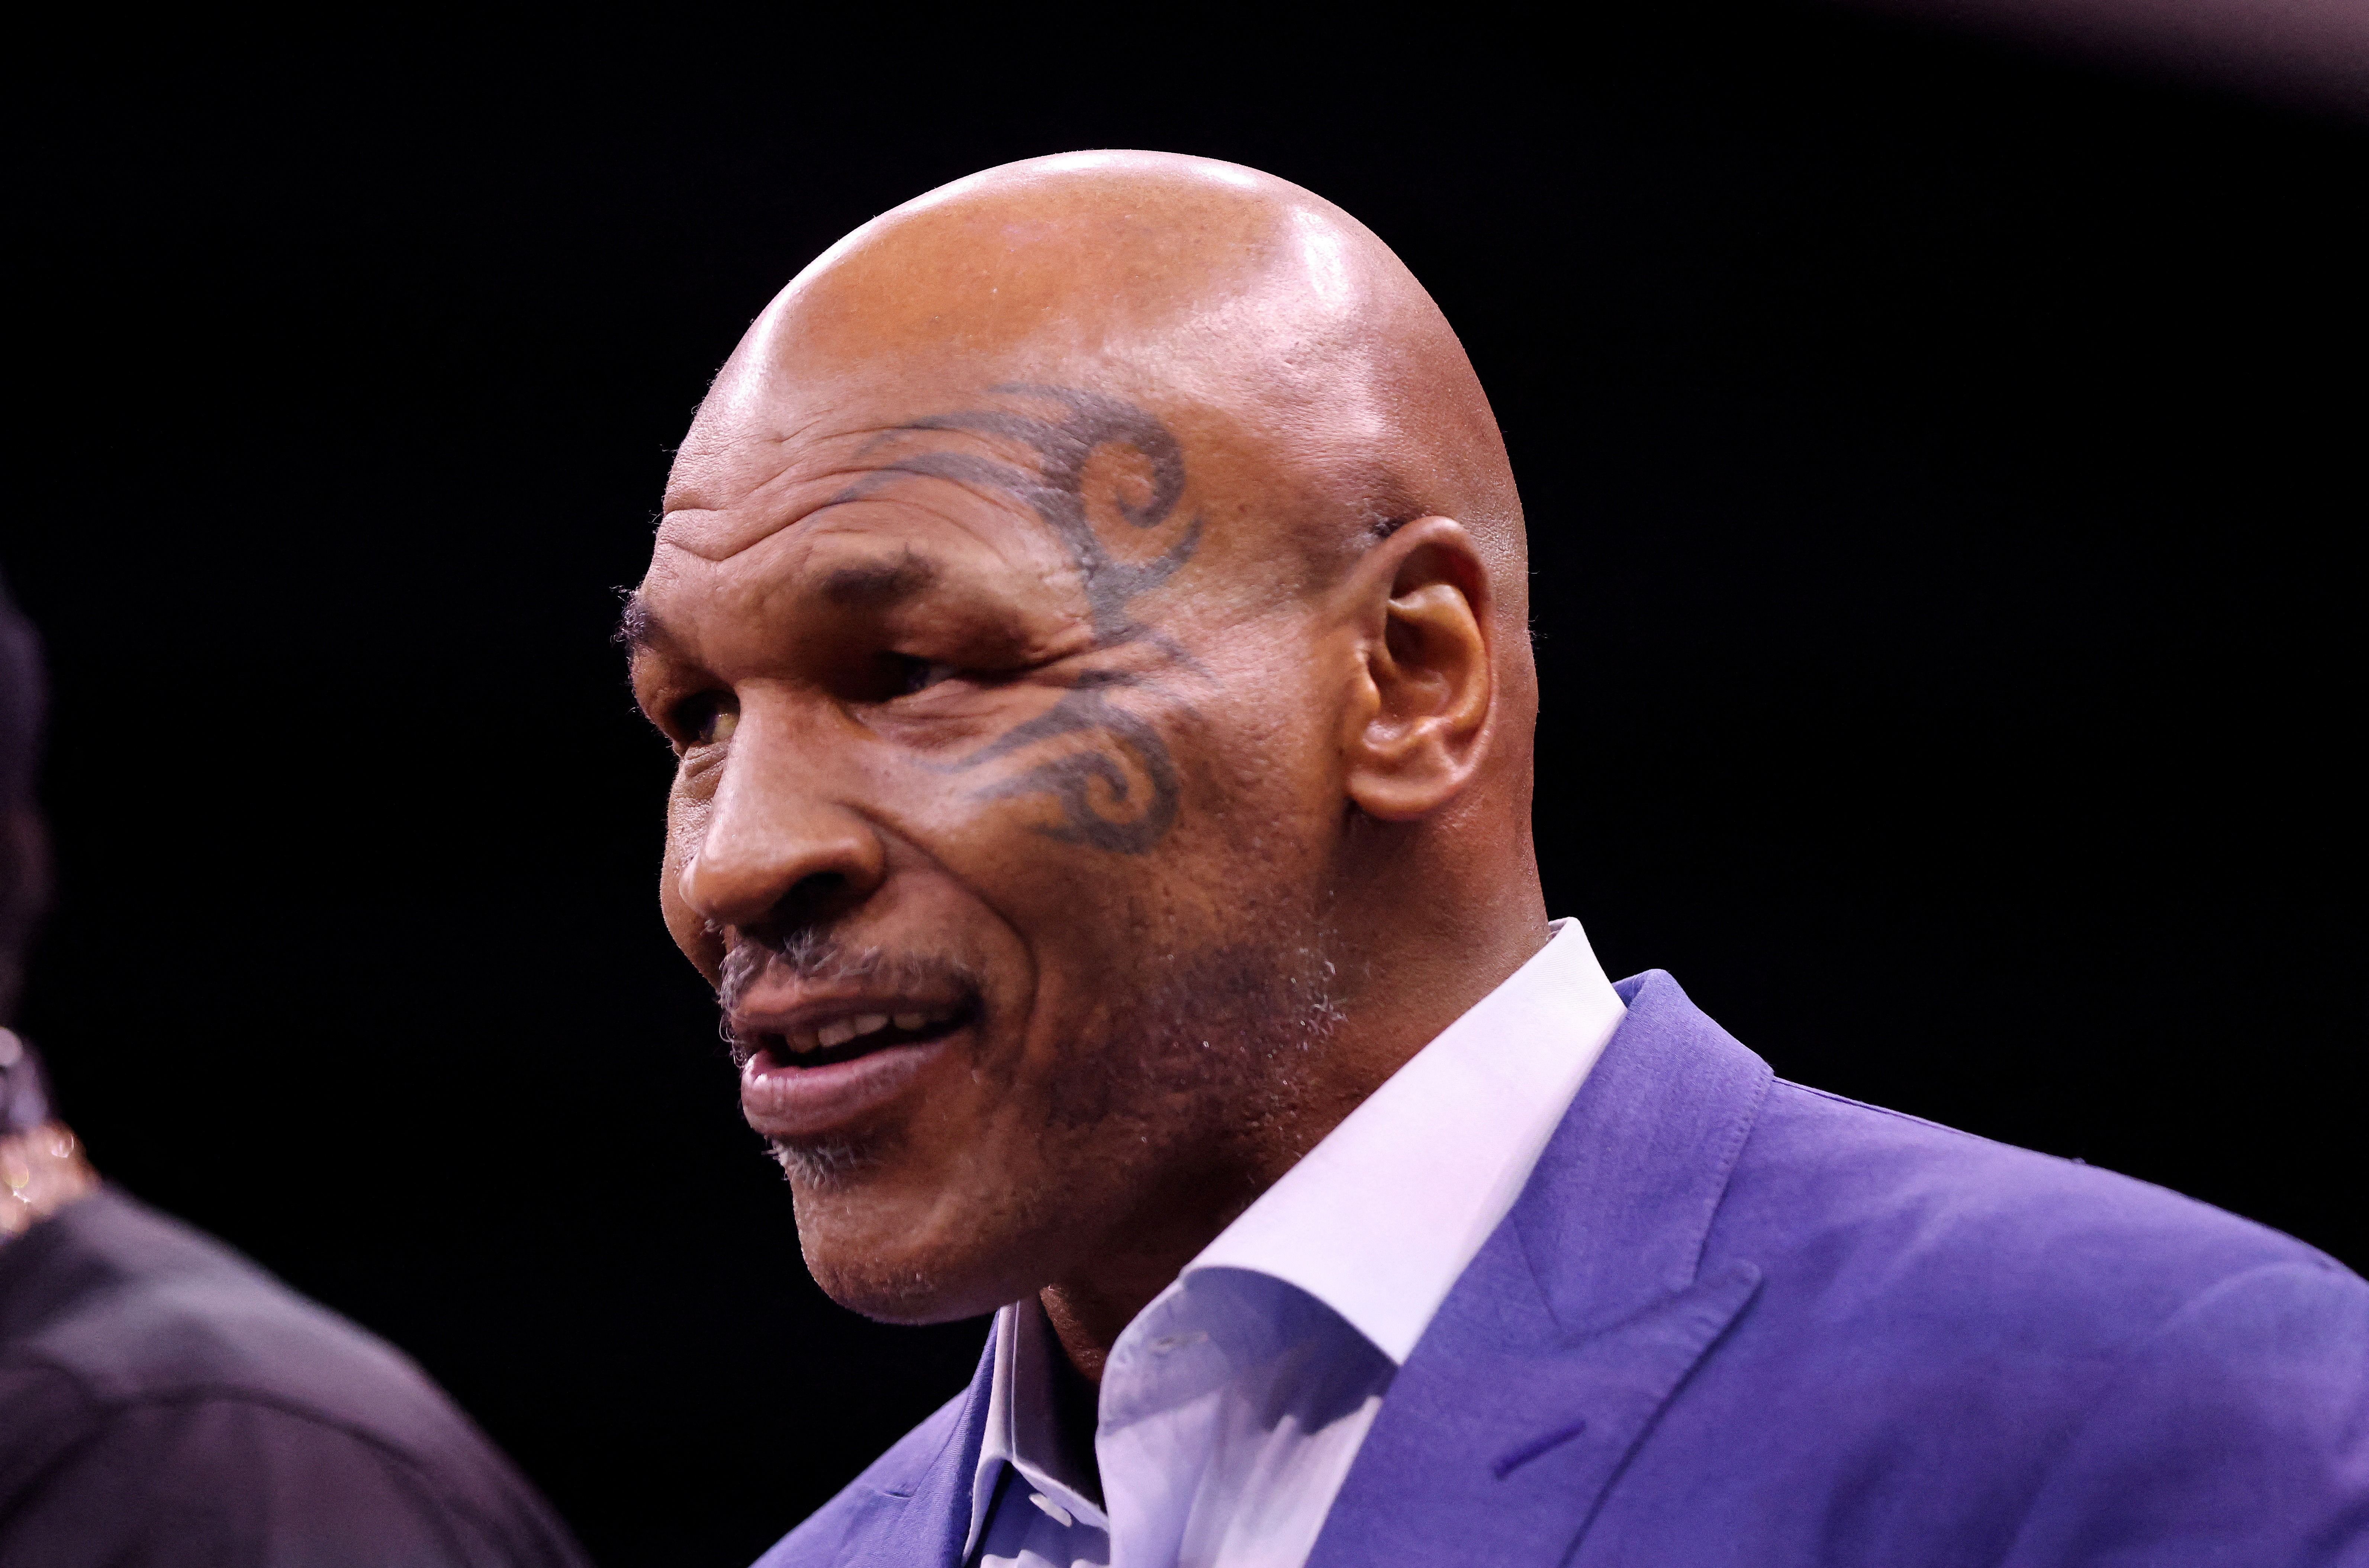 Mike Tyson Confesses He's 'Scared To Death' Before His Fight With Jake Paul